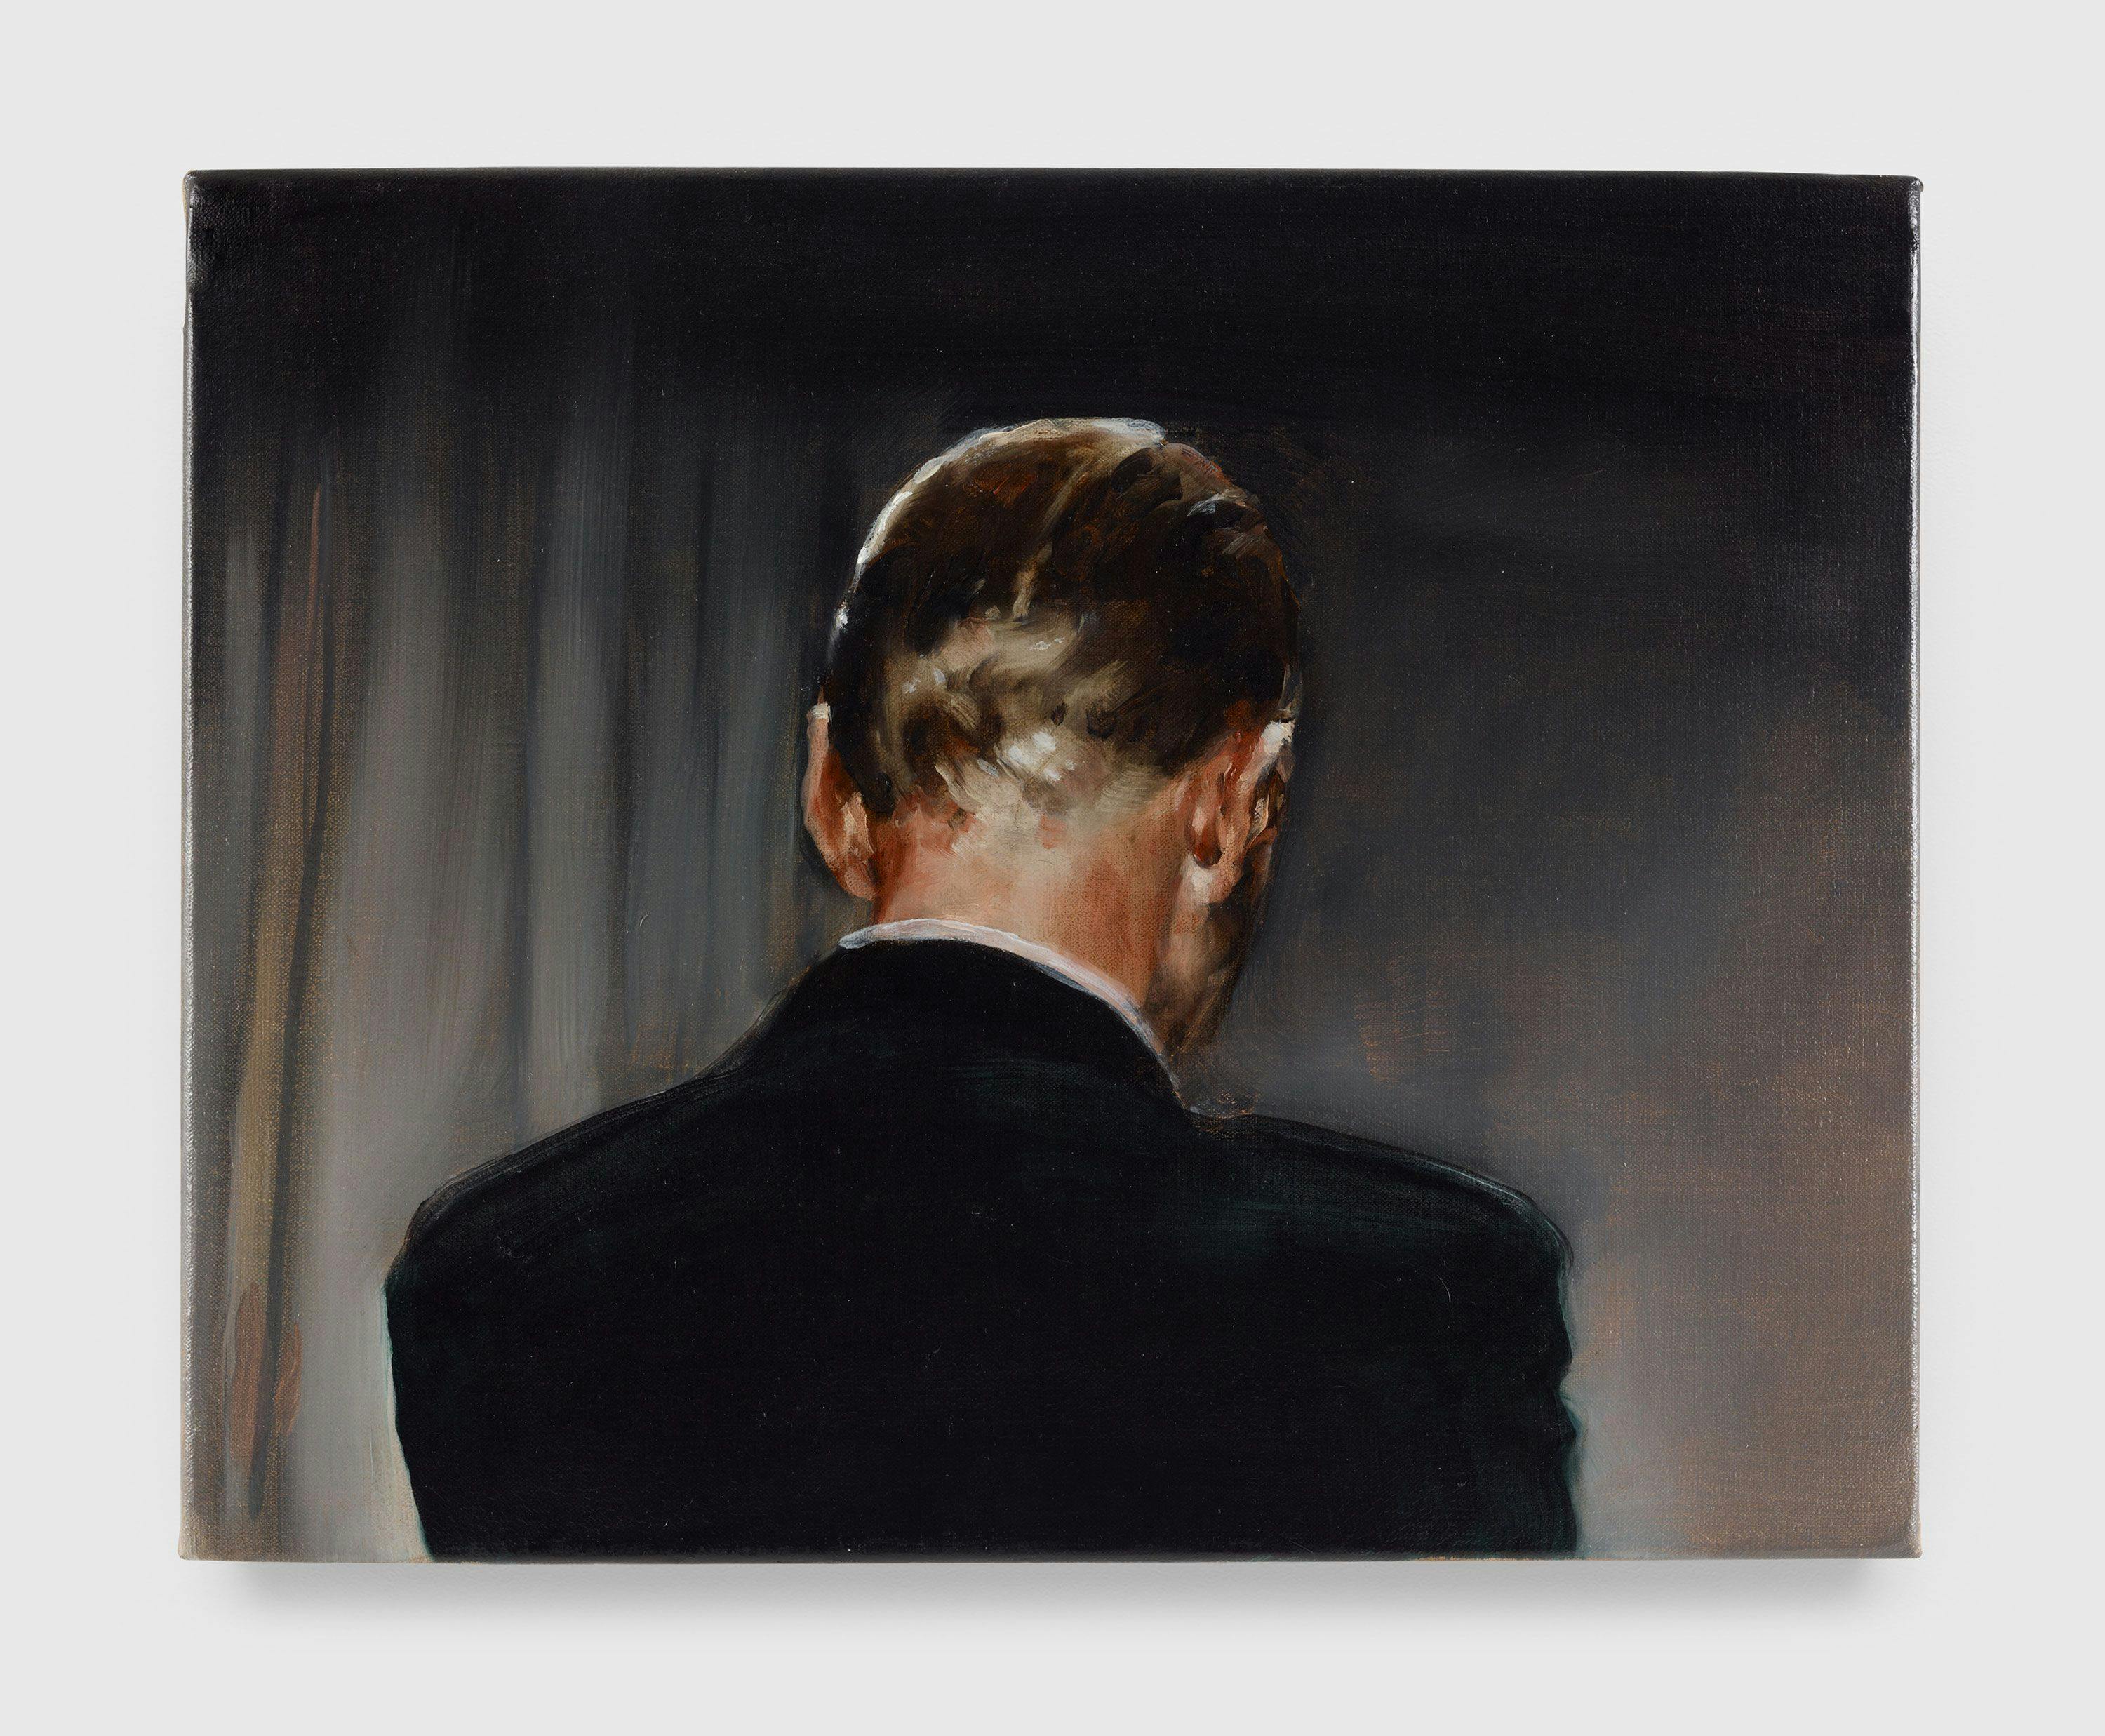 A painting by Michaël Borremans, titled Still, dated 2005.